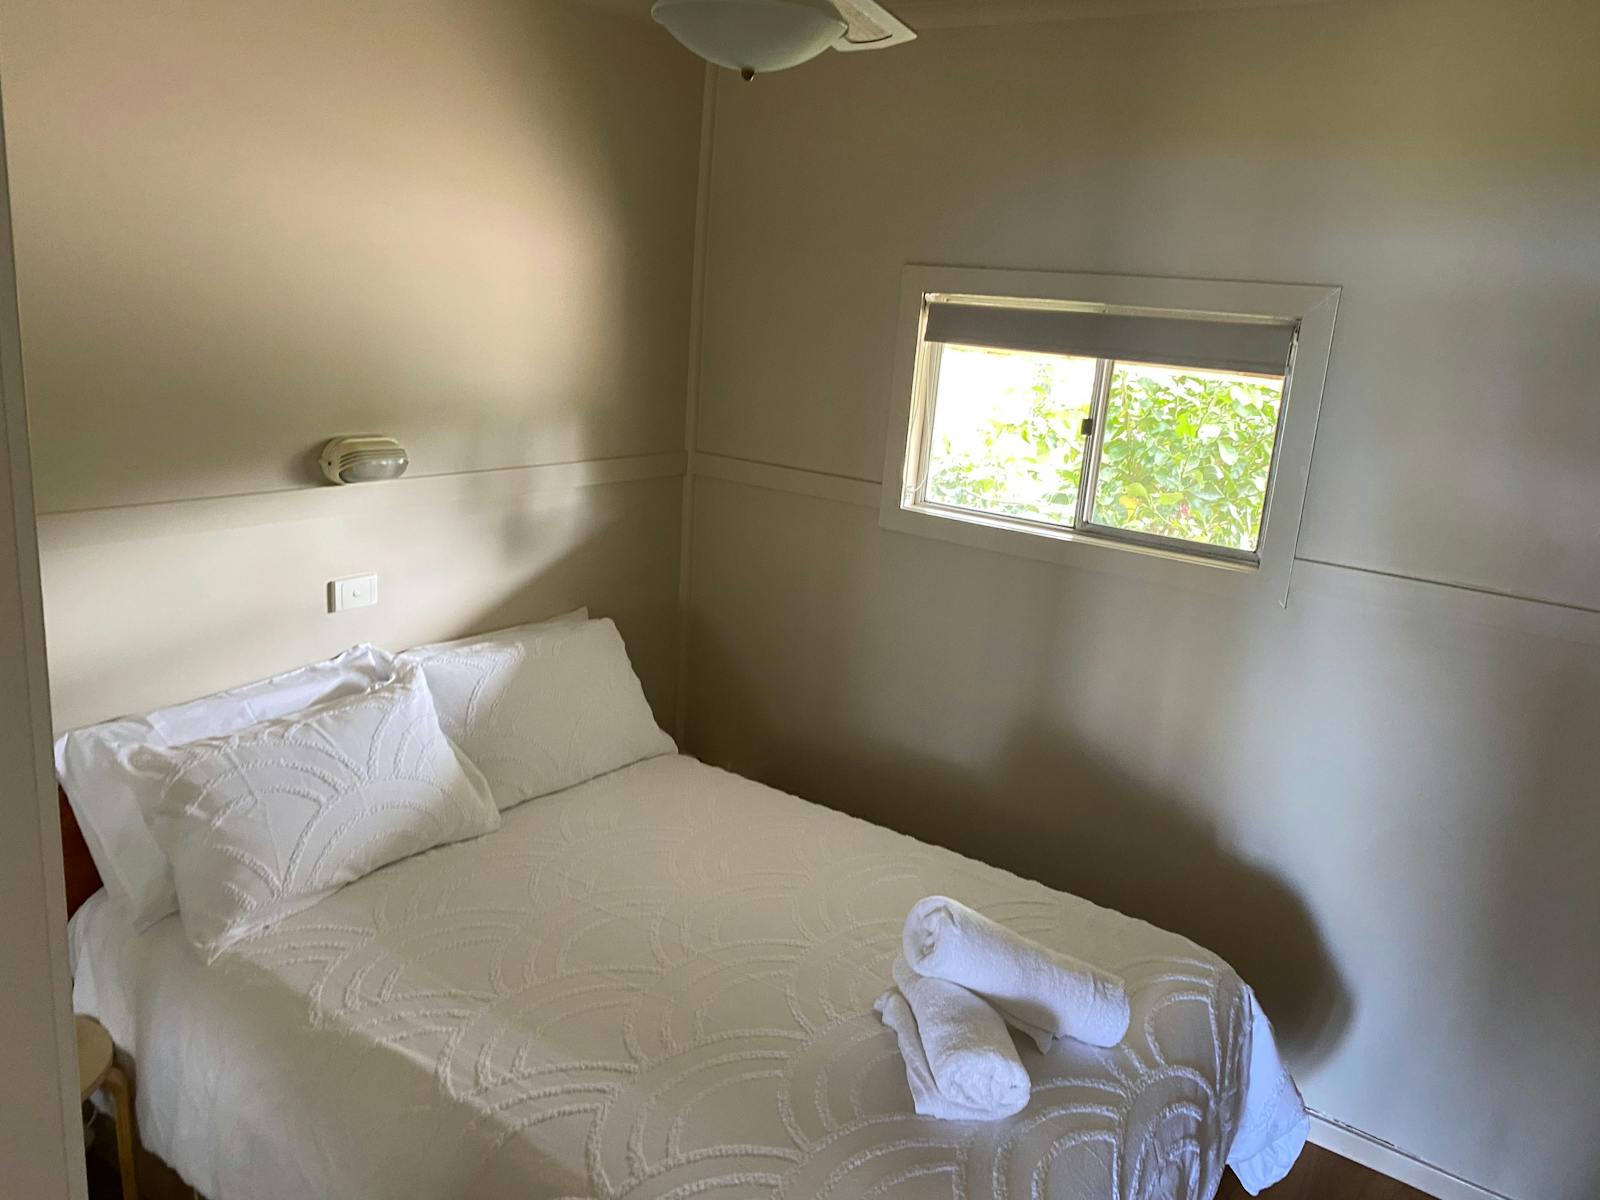 The main bedroom includes double bed, ceiling fan and wardrobe.